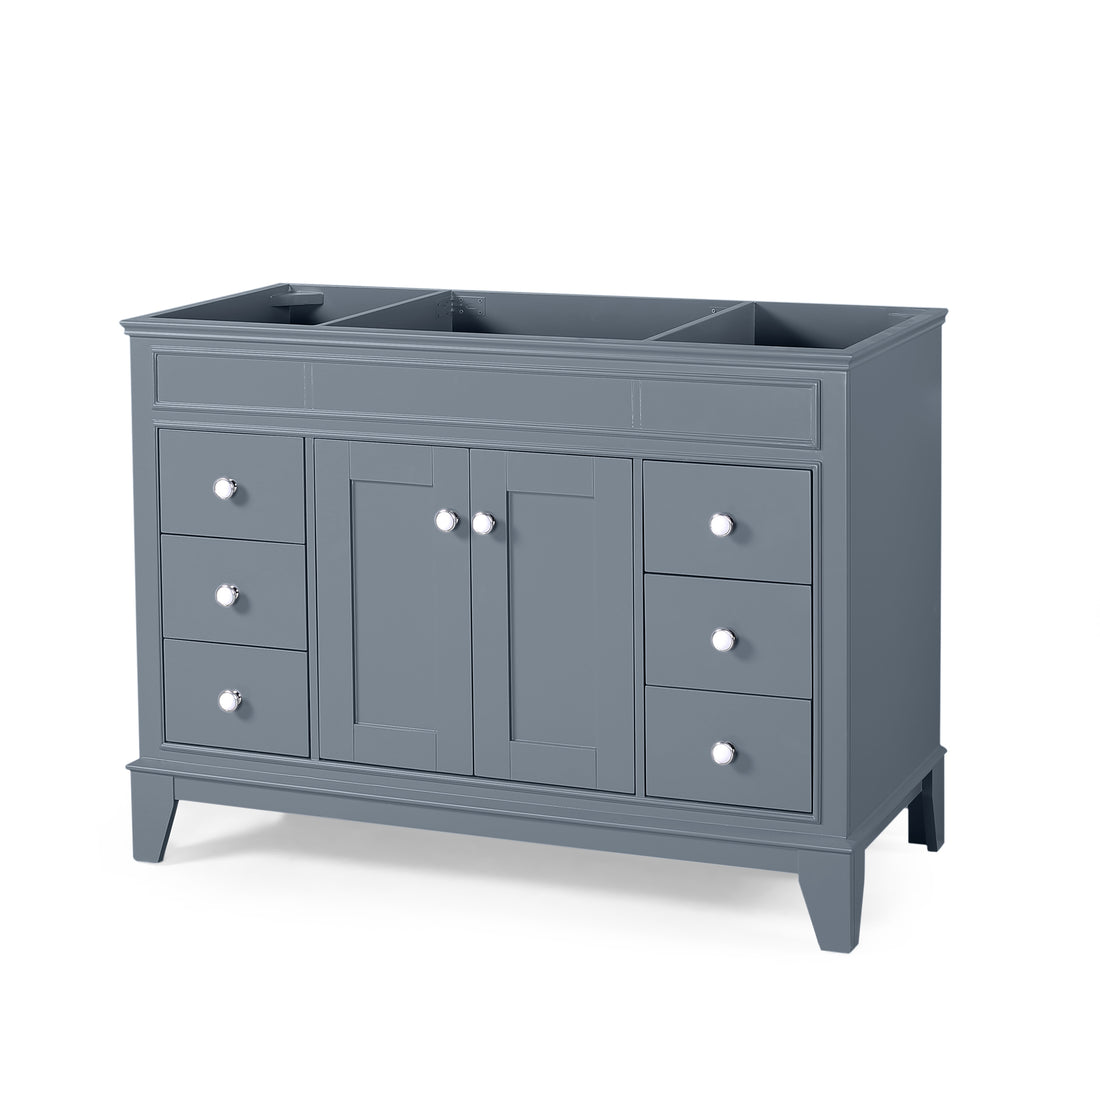 48'' Cabinet - Gray Plywood